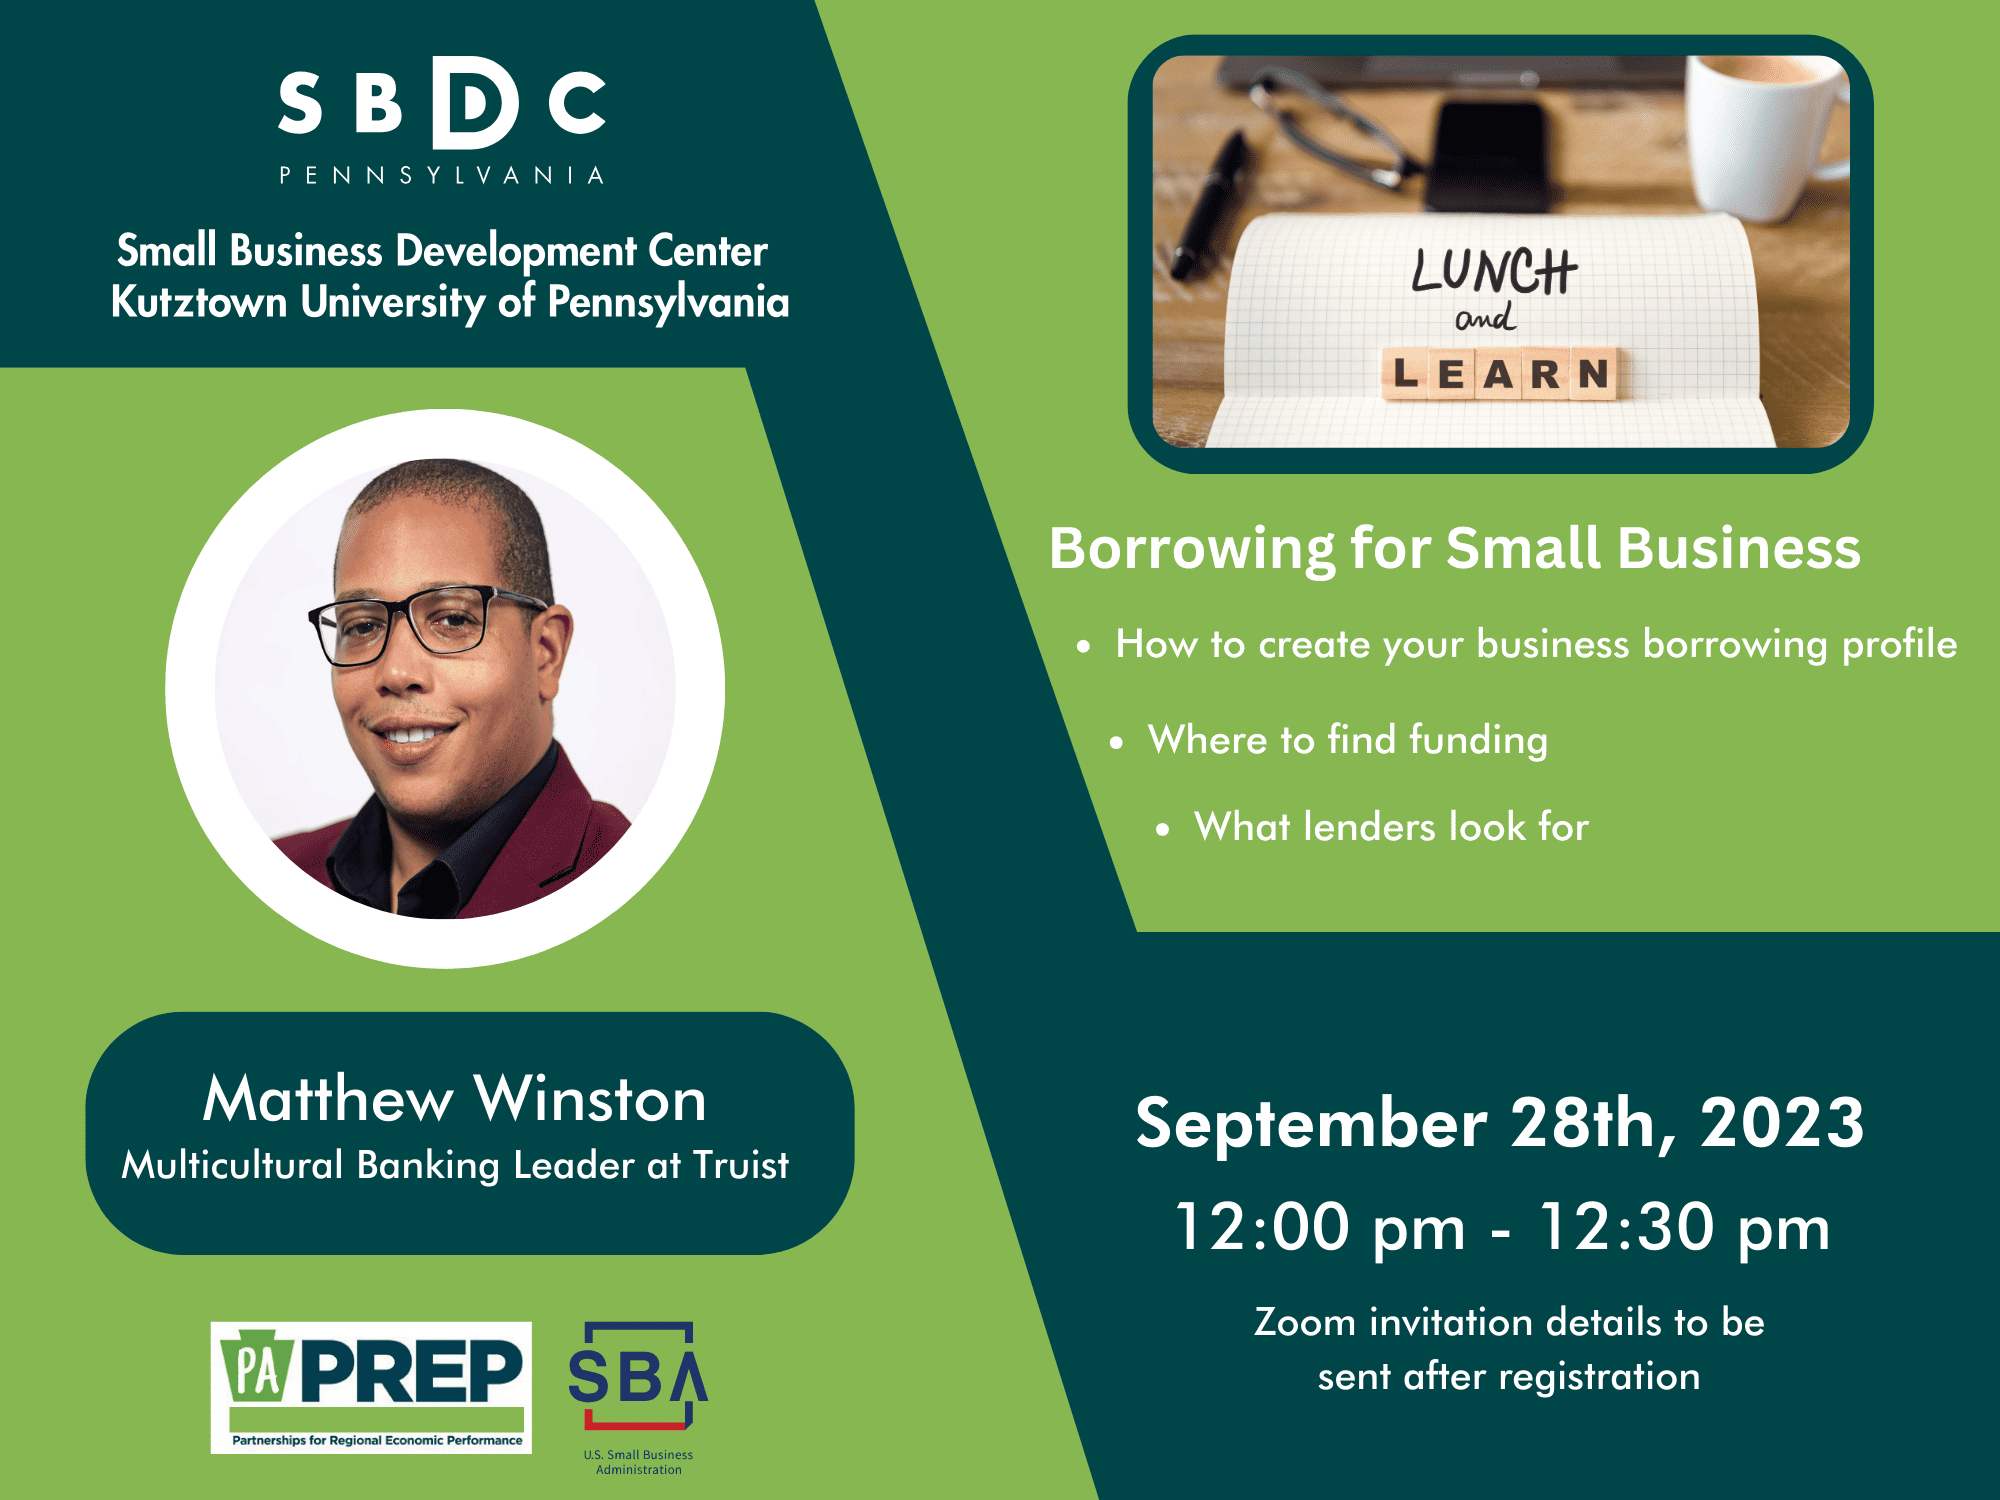 Lunch & Learn: Borrowing for Small Business by Matthew Winston